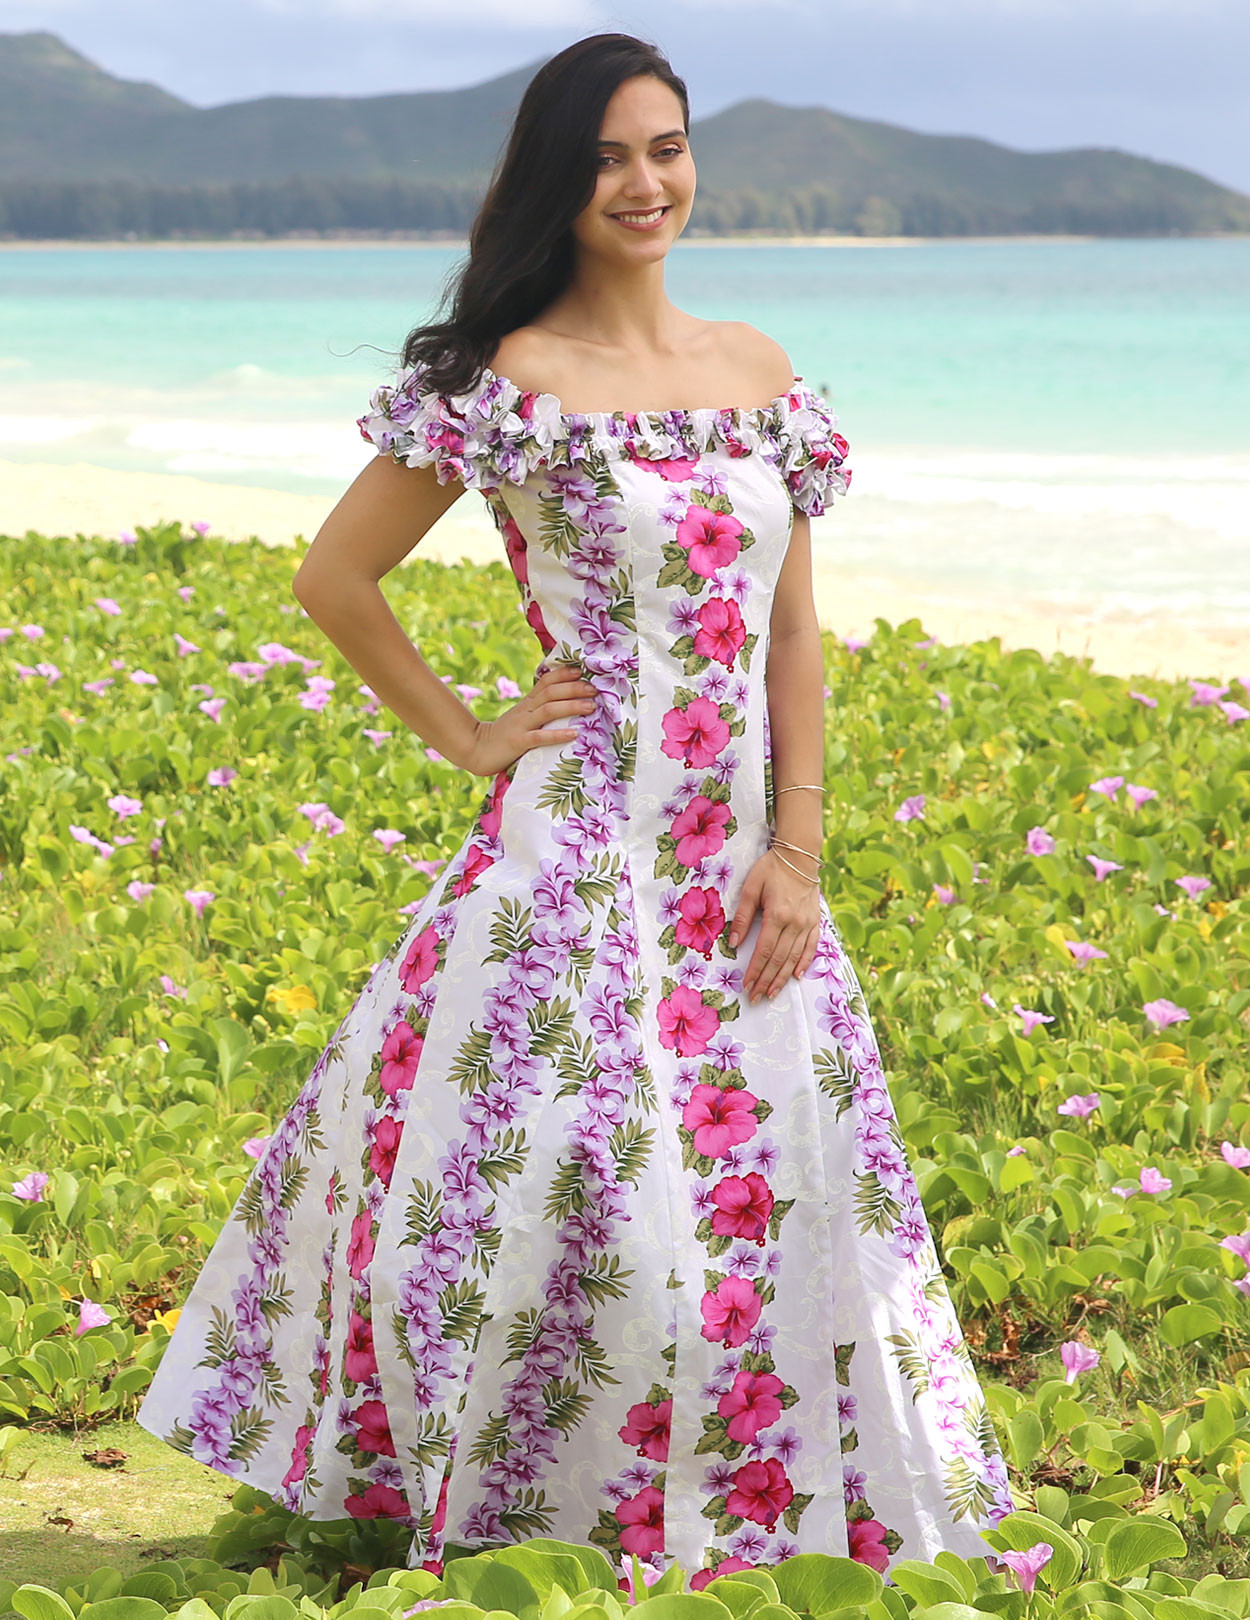 Great Polynesian Wedding Dresses of the decade The ultimate guide 